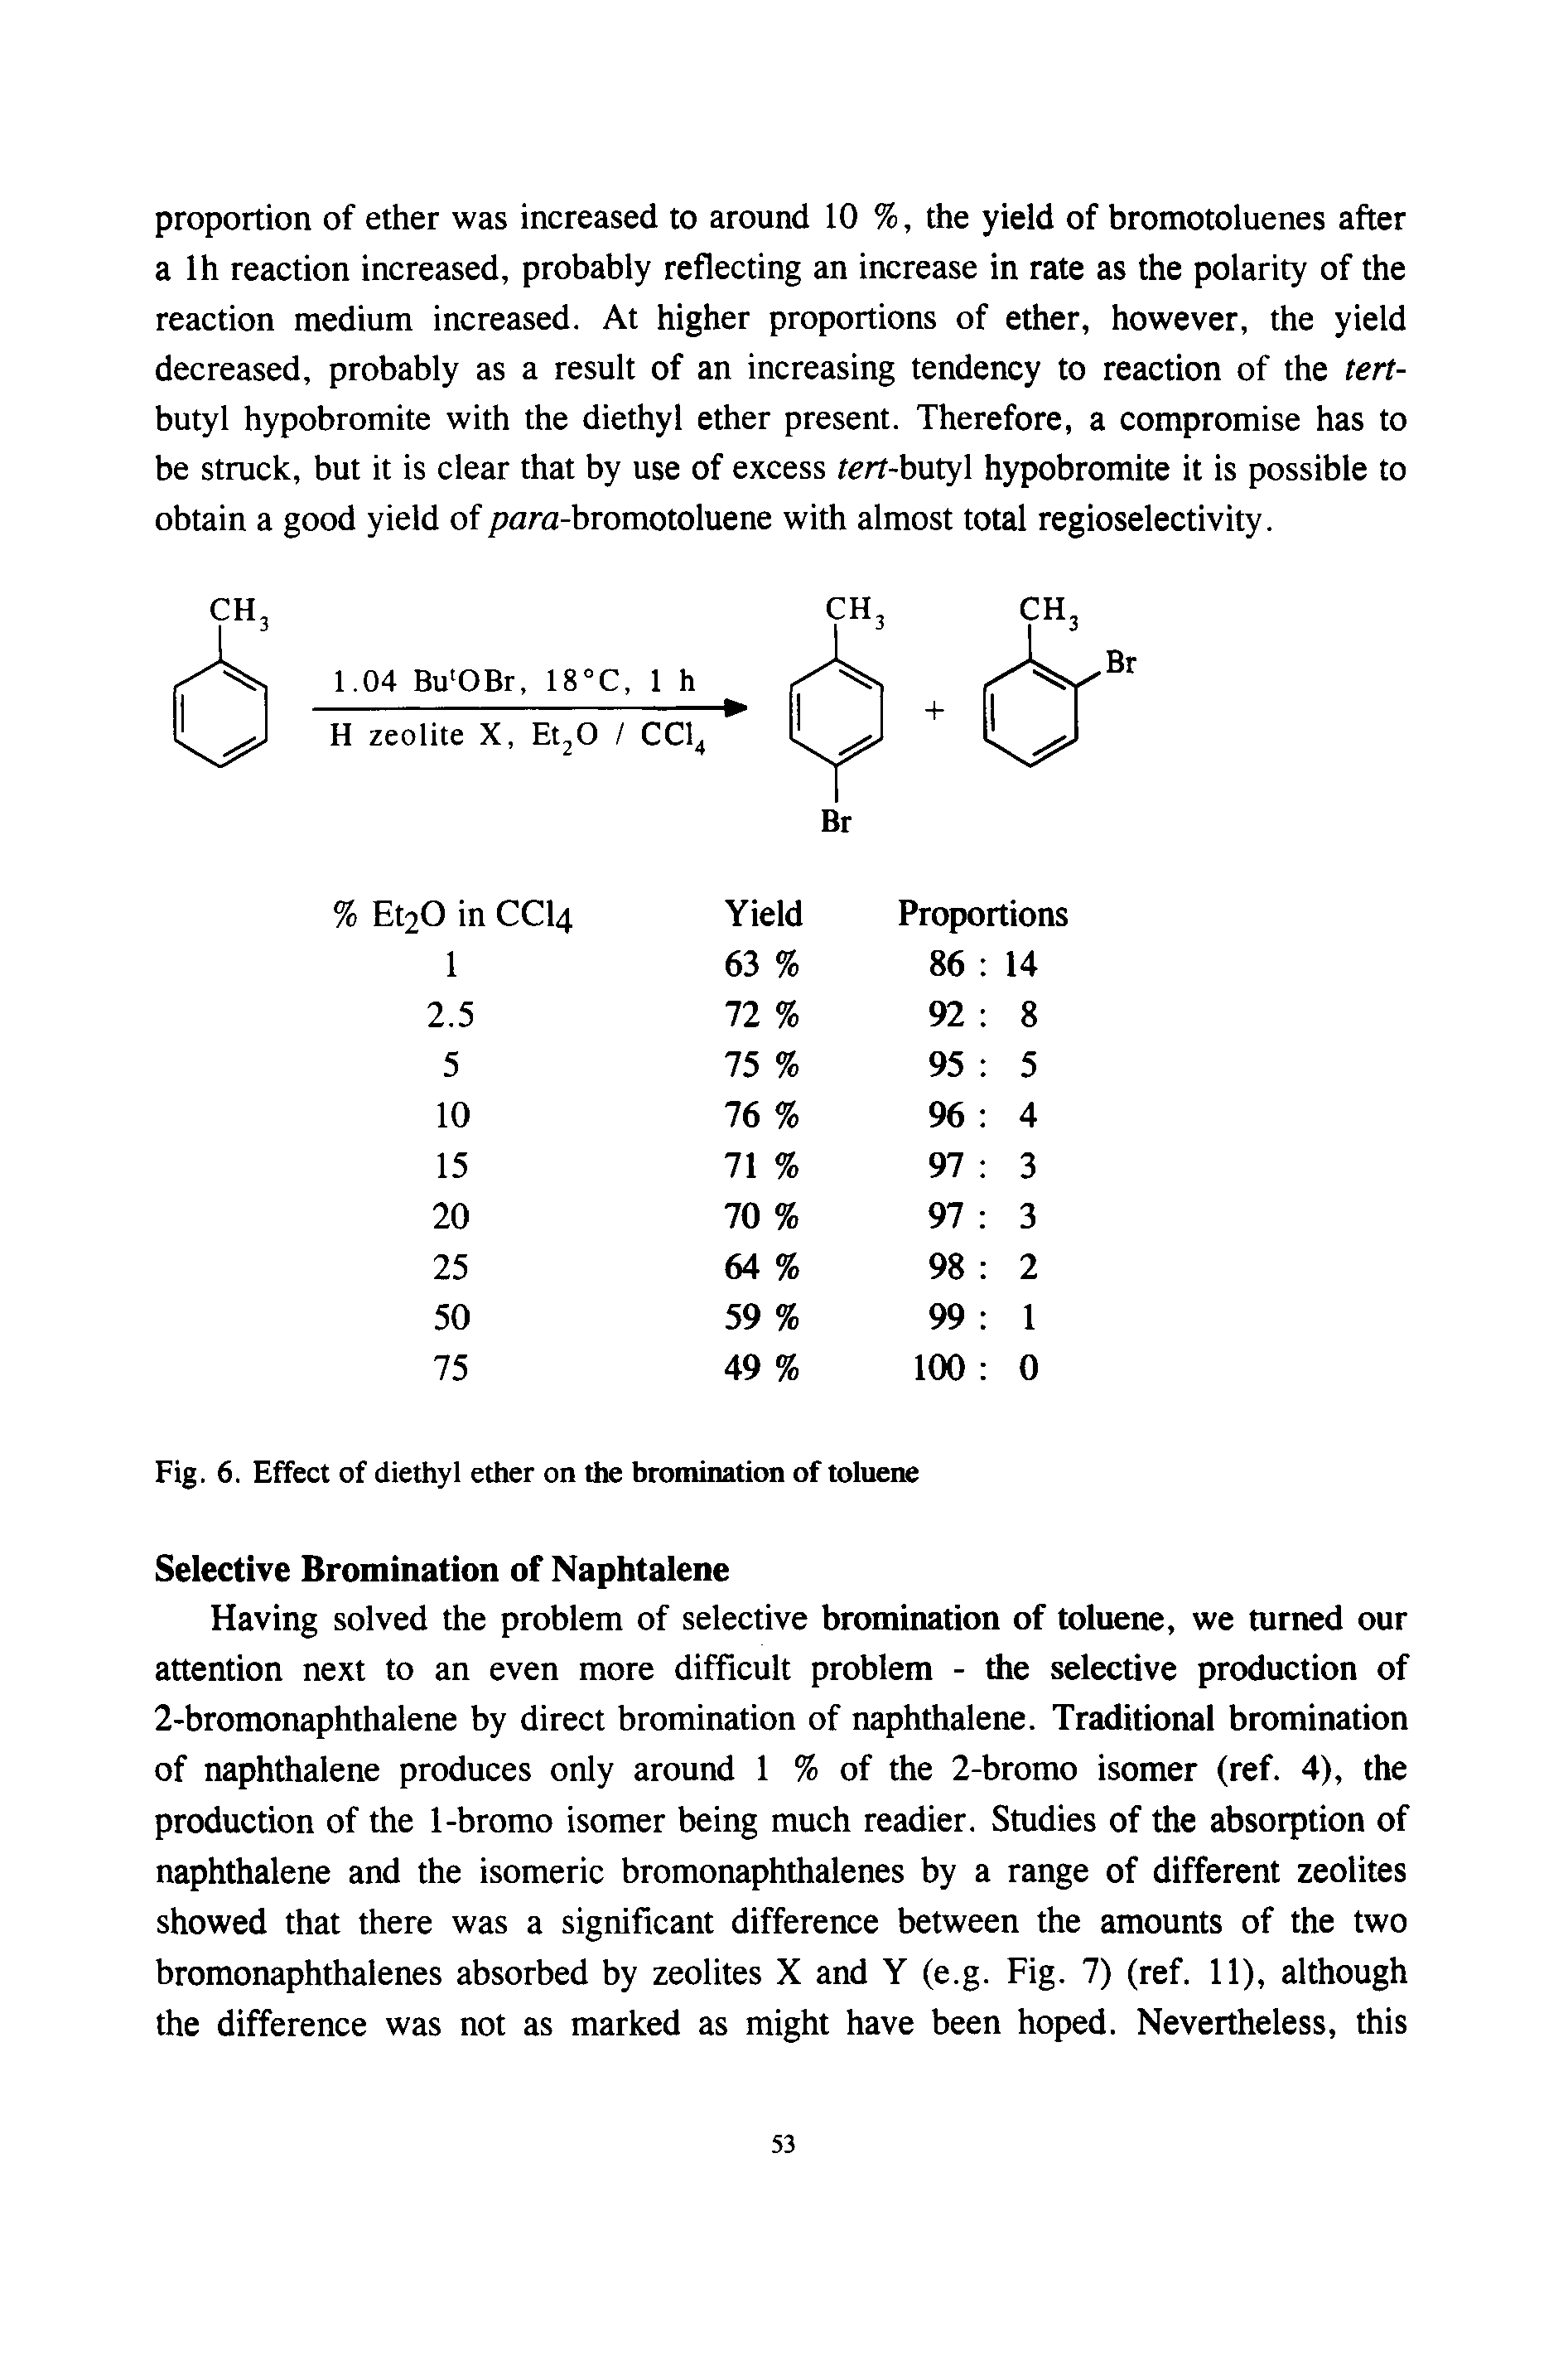 Fig. 6. Effect of diethyl ether on the bromination of toluene Selective Bromination of Naphtalene...